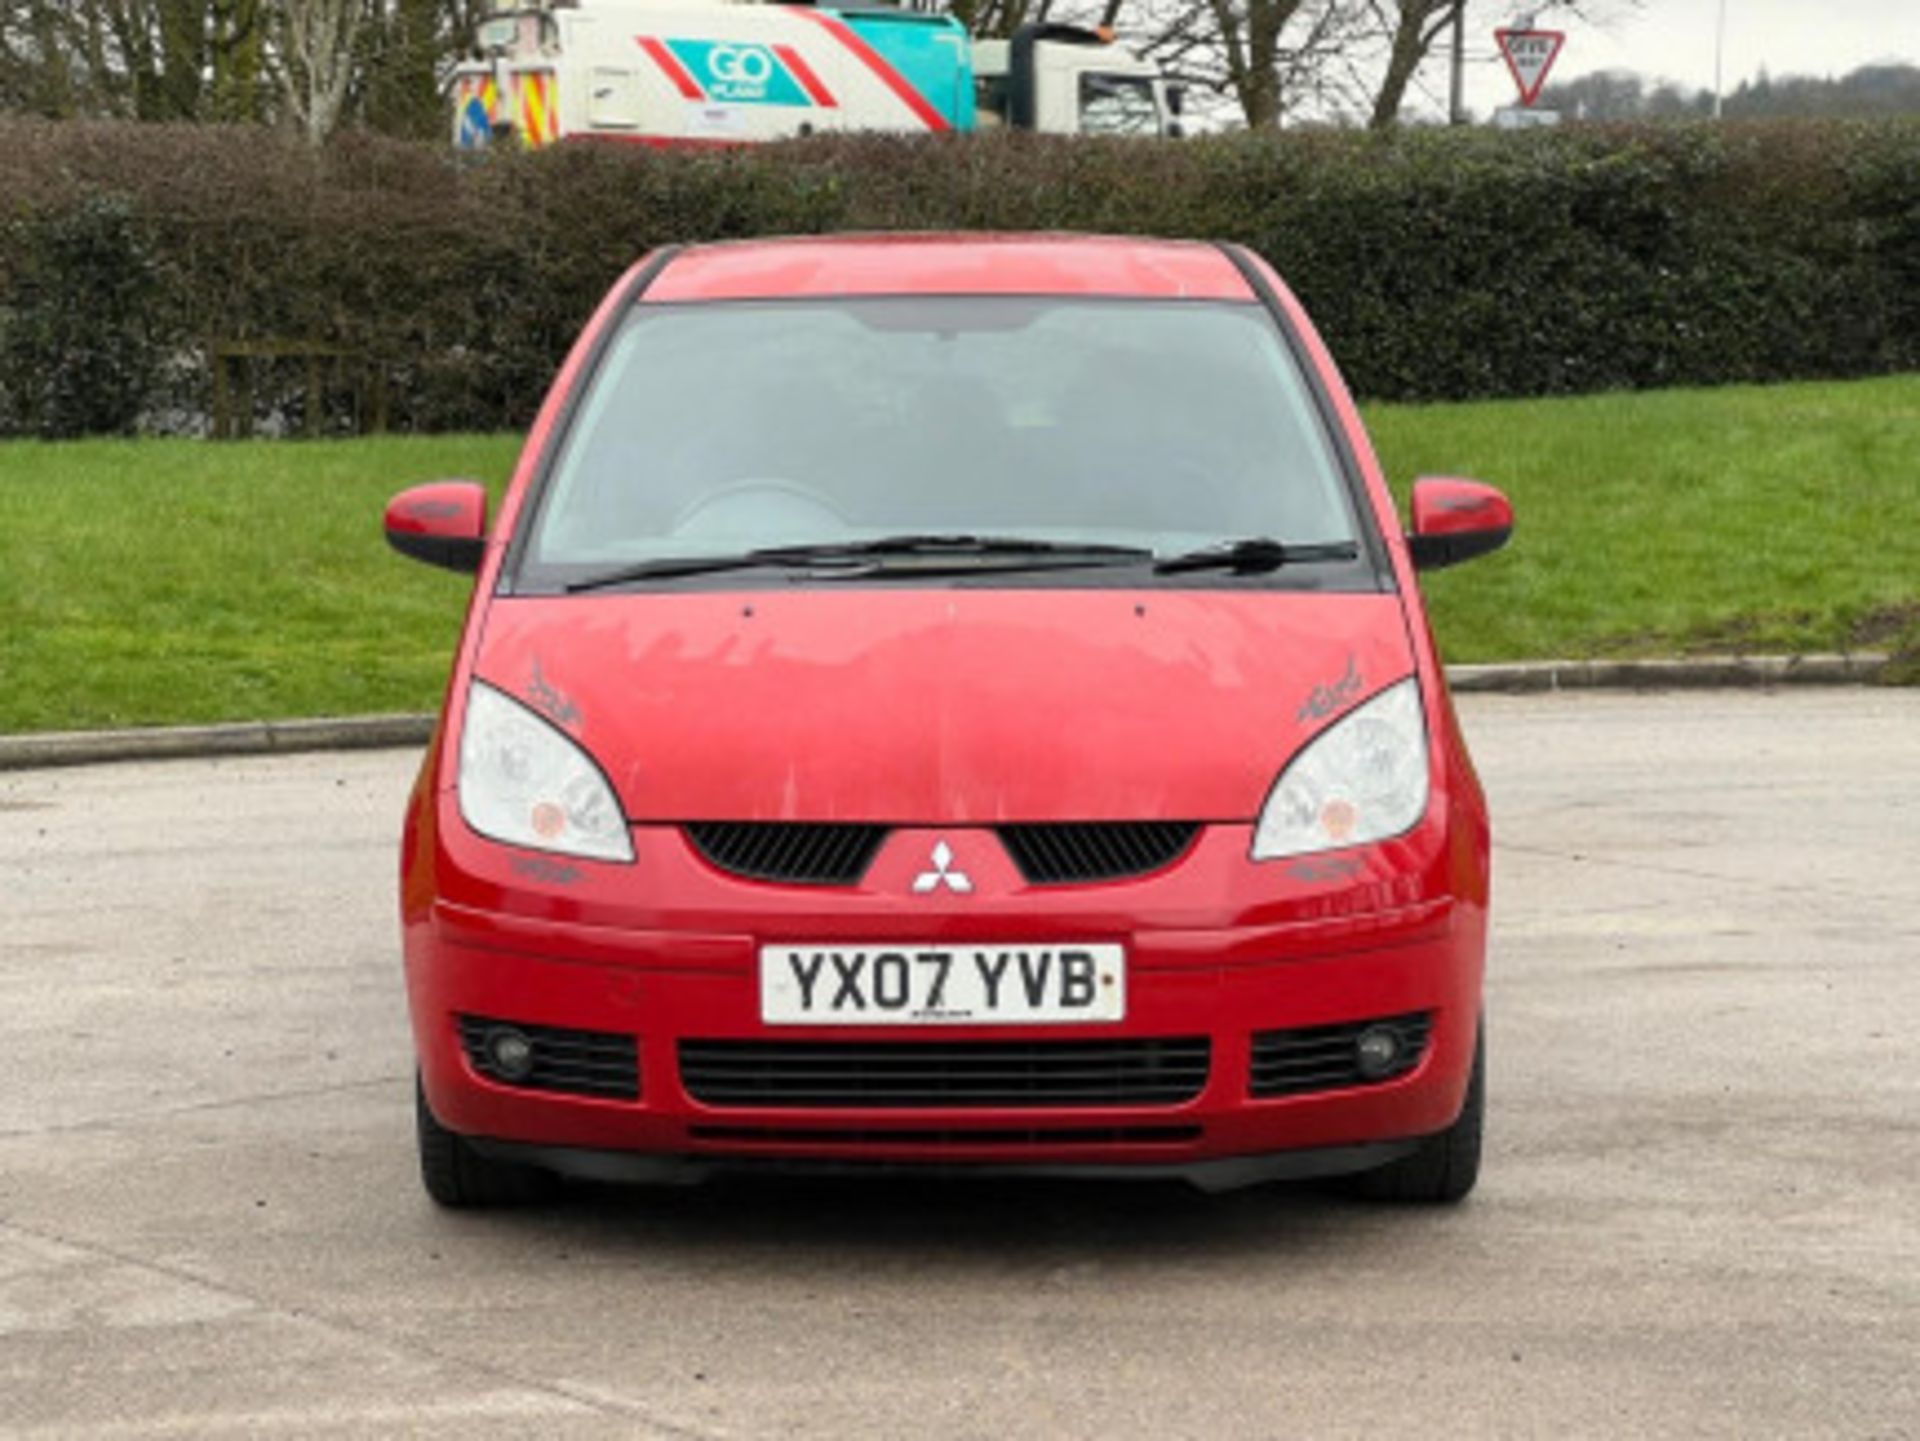 2007 MITSUBISHI COLT 1.5 DI-D DIESEL AUTOMATIC >>--NO VAT ON HAMMER--<< - Image 87 of 191